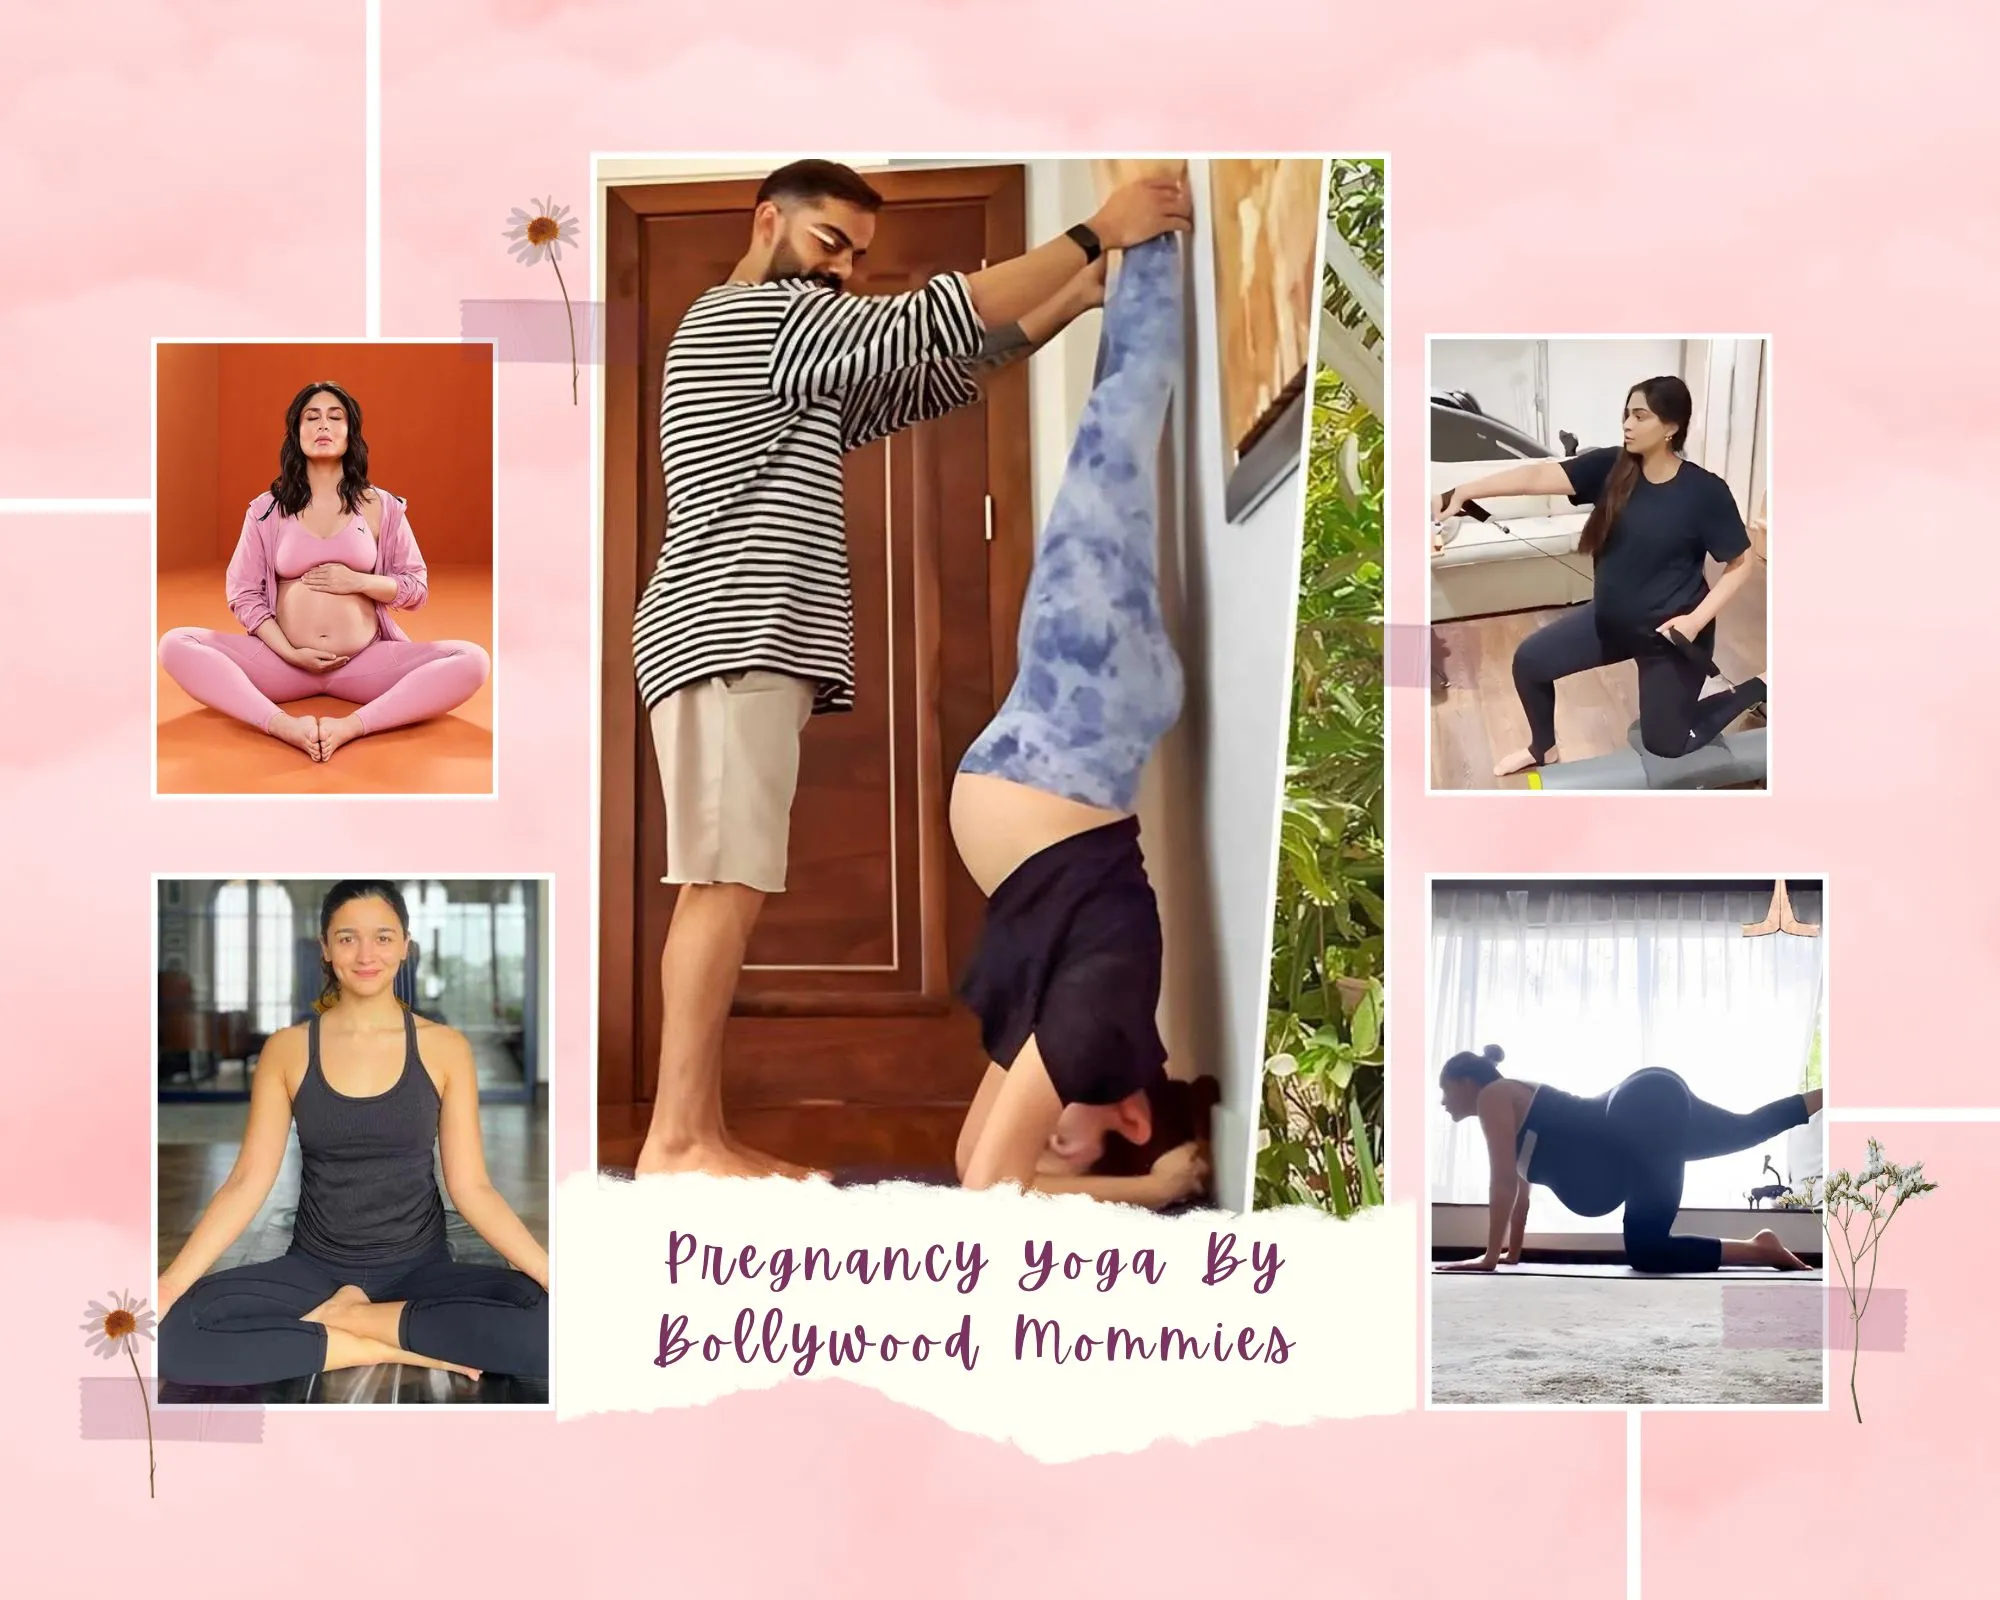 Yoga during the First Trimester - Mine4Nine